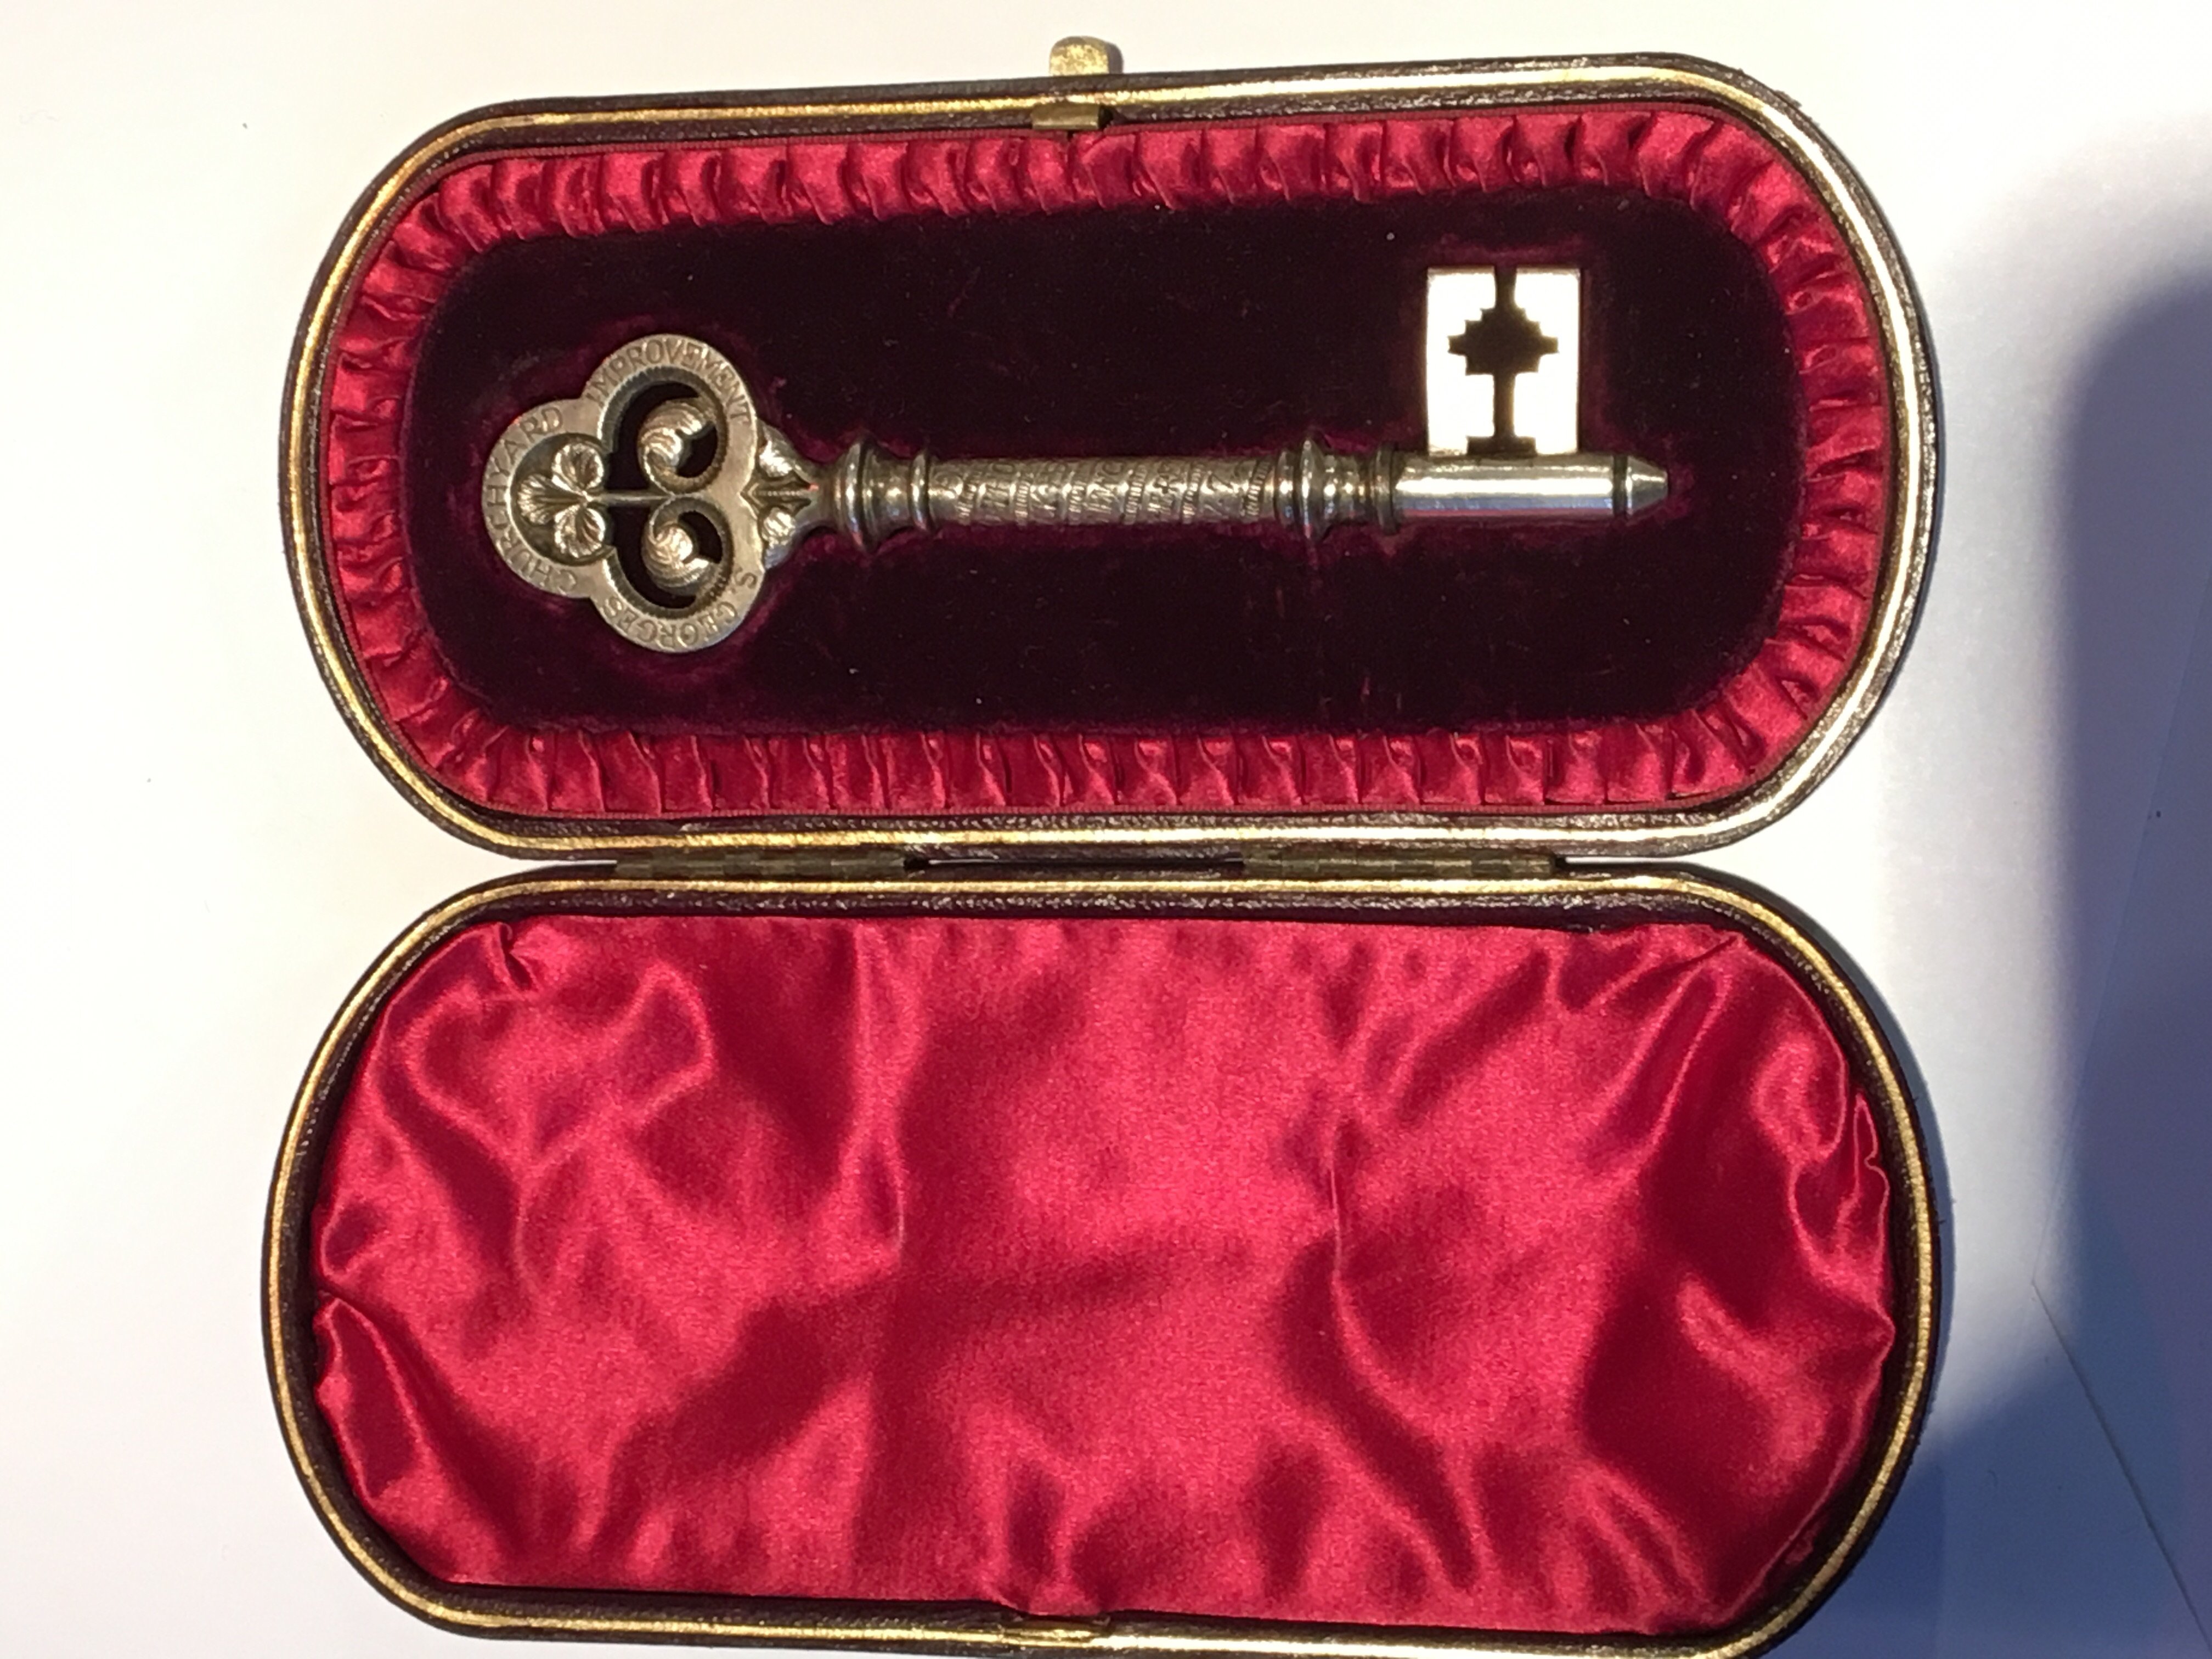 A quality Sterling Silver Victorian hall marked Presentation key engraved around the key shaft